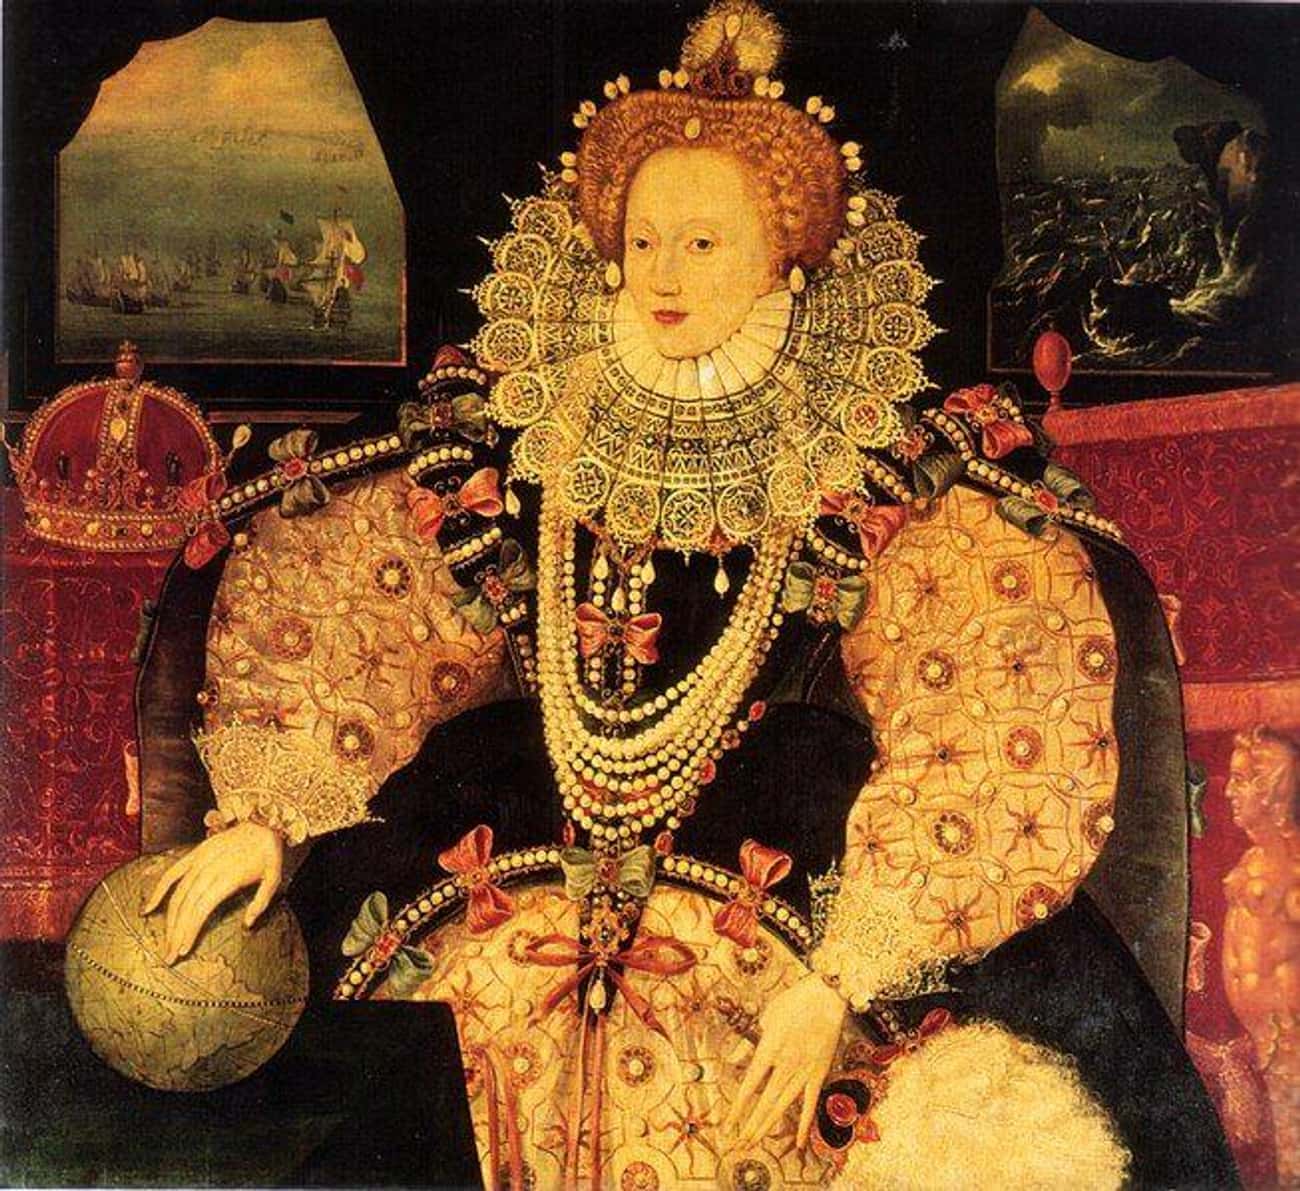 Queen Elizabeth I, 'The Speech To The Troops At Tilbury' - August 9, 1588 